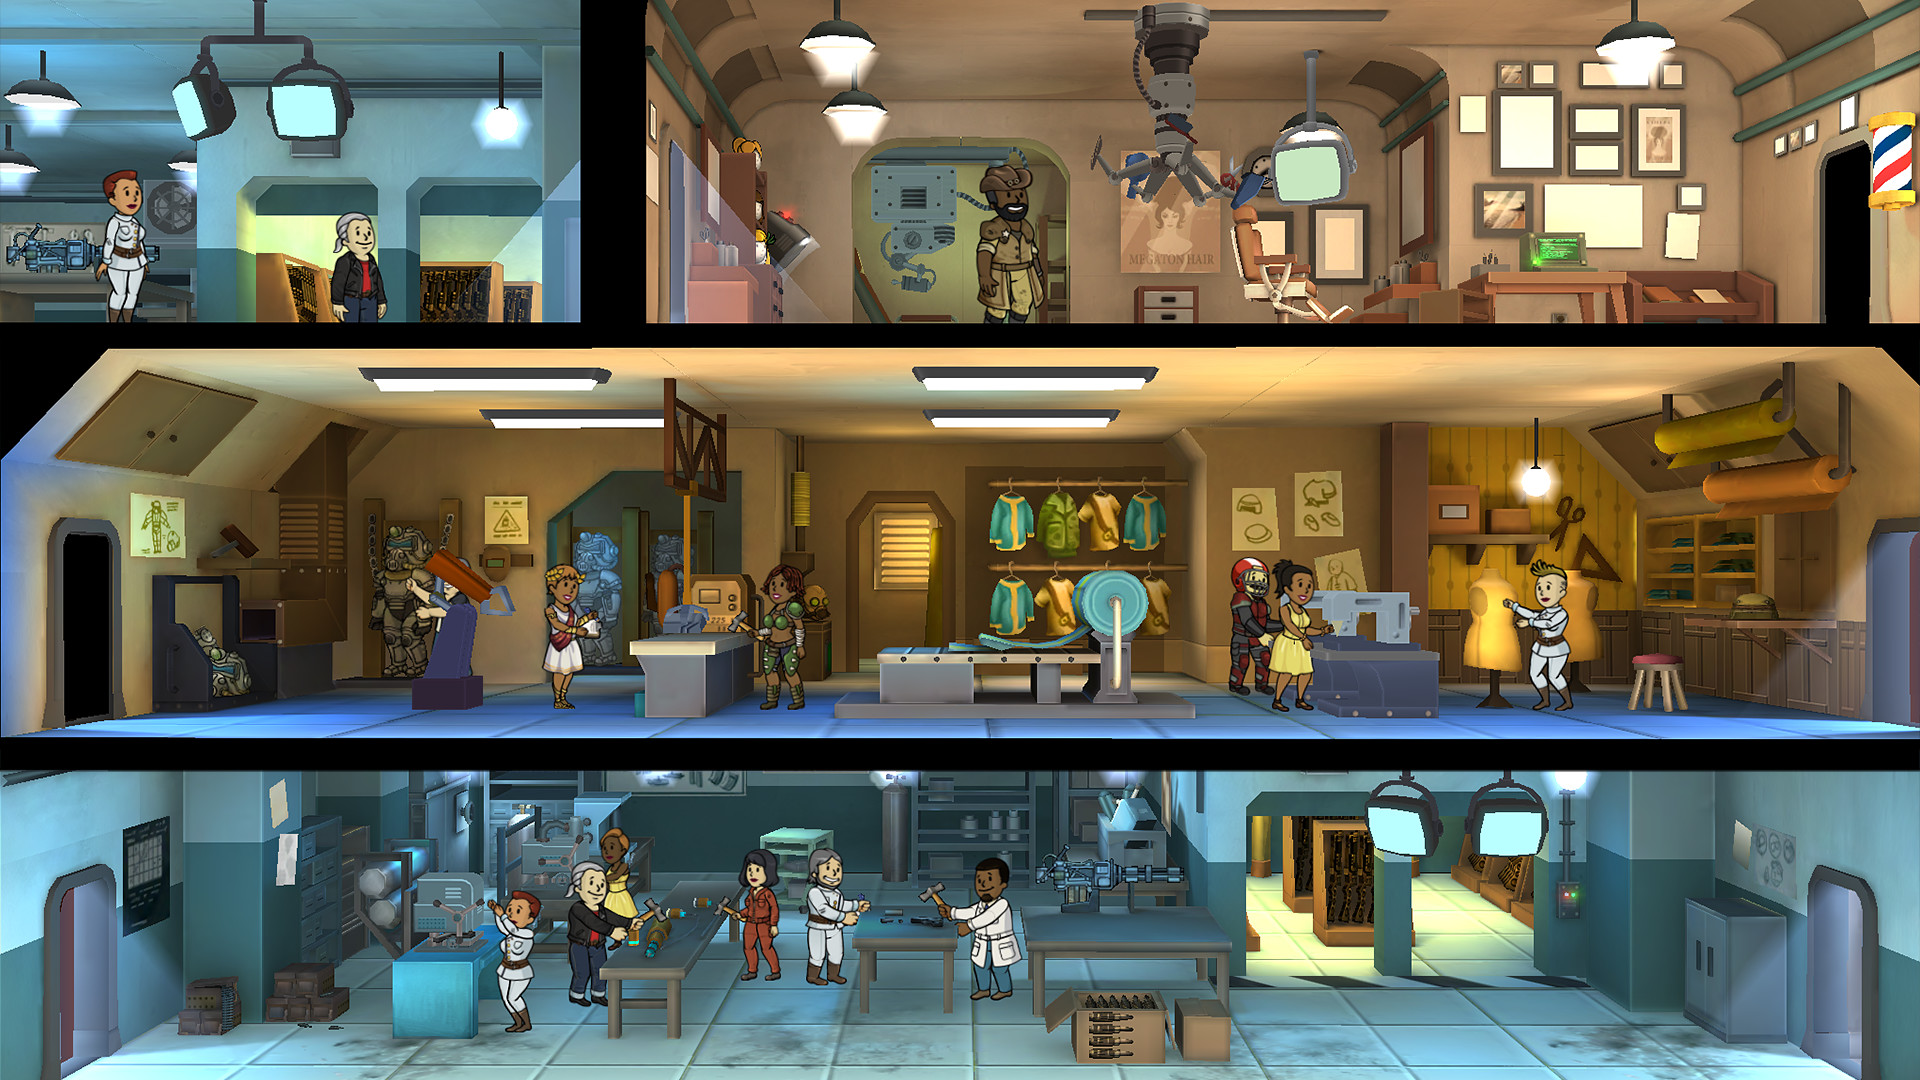 Best idle games: Fallout Shelter. Image shows a bunker full of people performing various tasks on different floors.